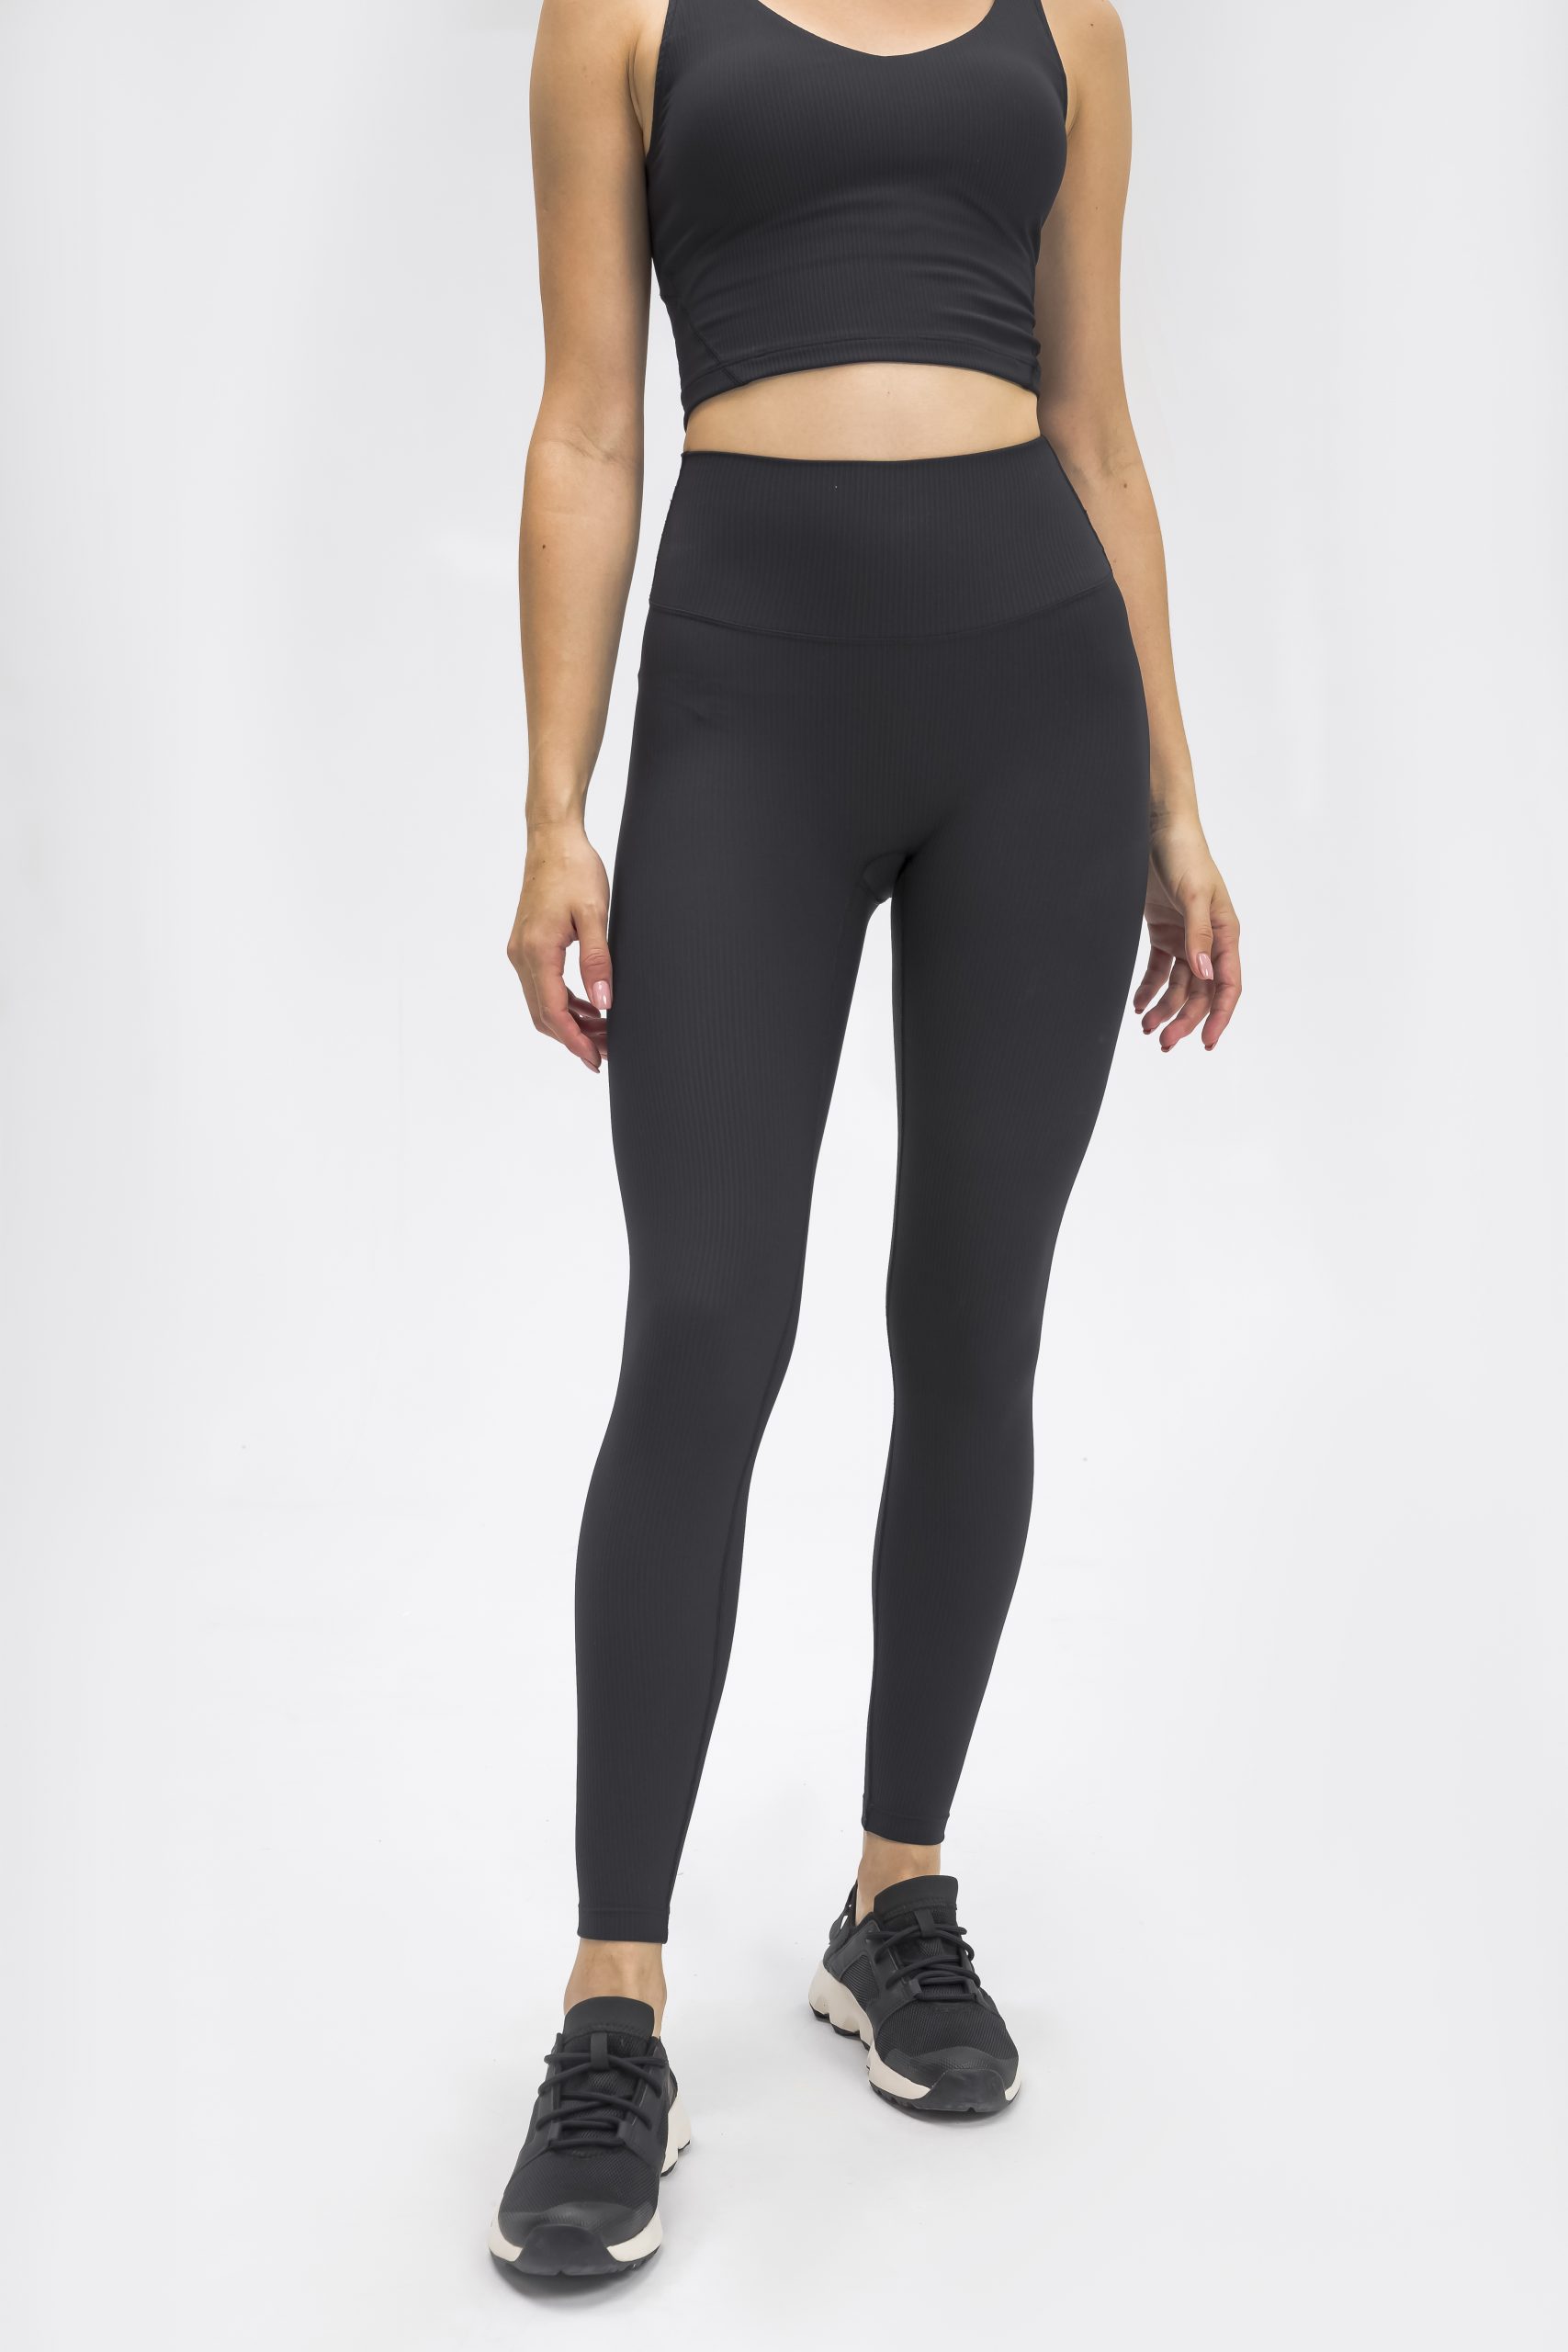 Personalized Wholesale High Elastic Women Fitness Leggings Manufacturers In  USA, AUS, CA And UAE